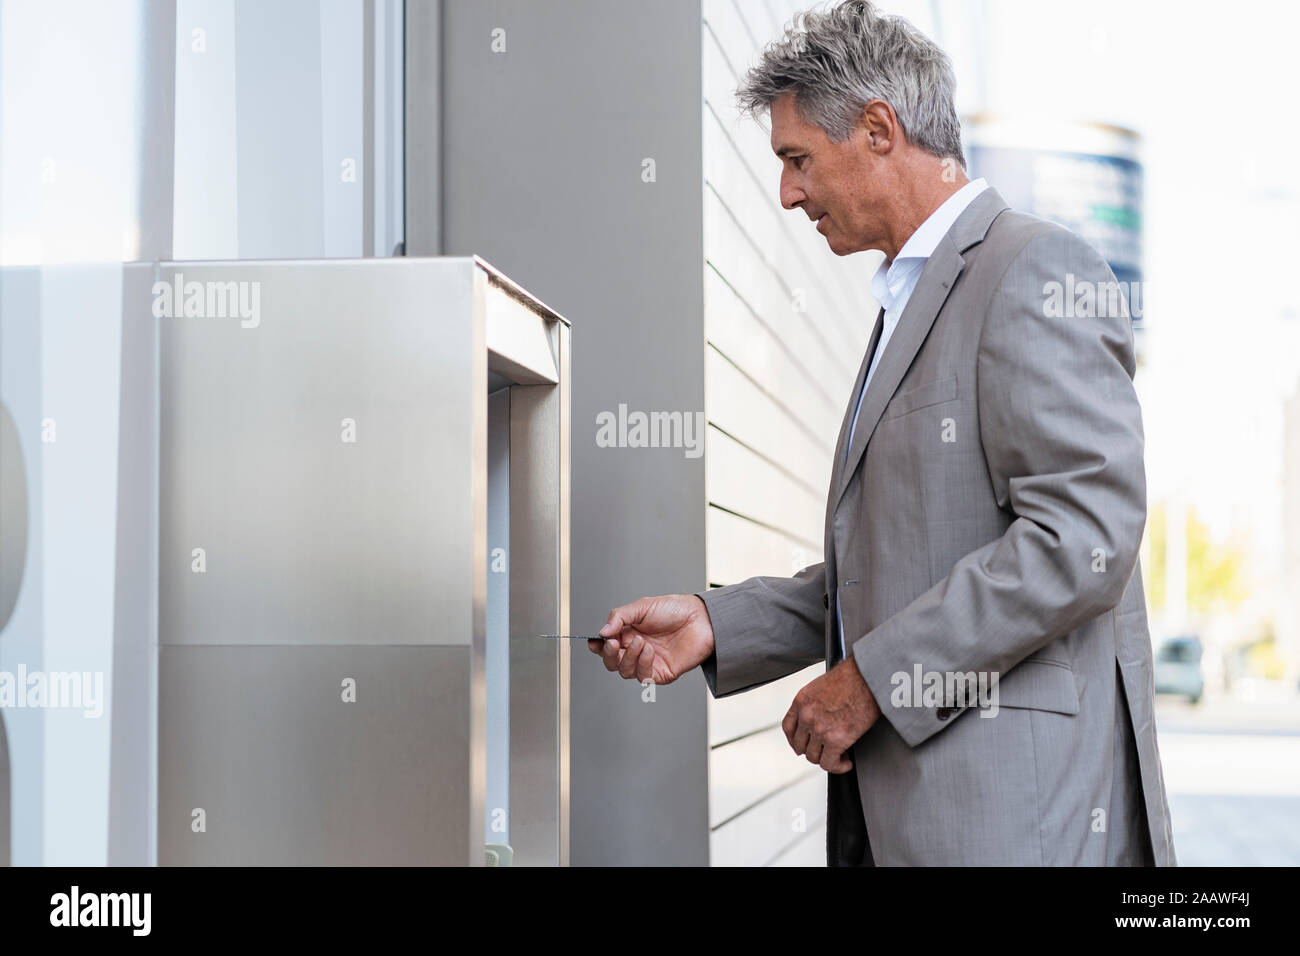 Mature businessman withdrawing money at an ATM Stock Photo